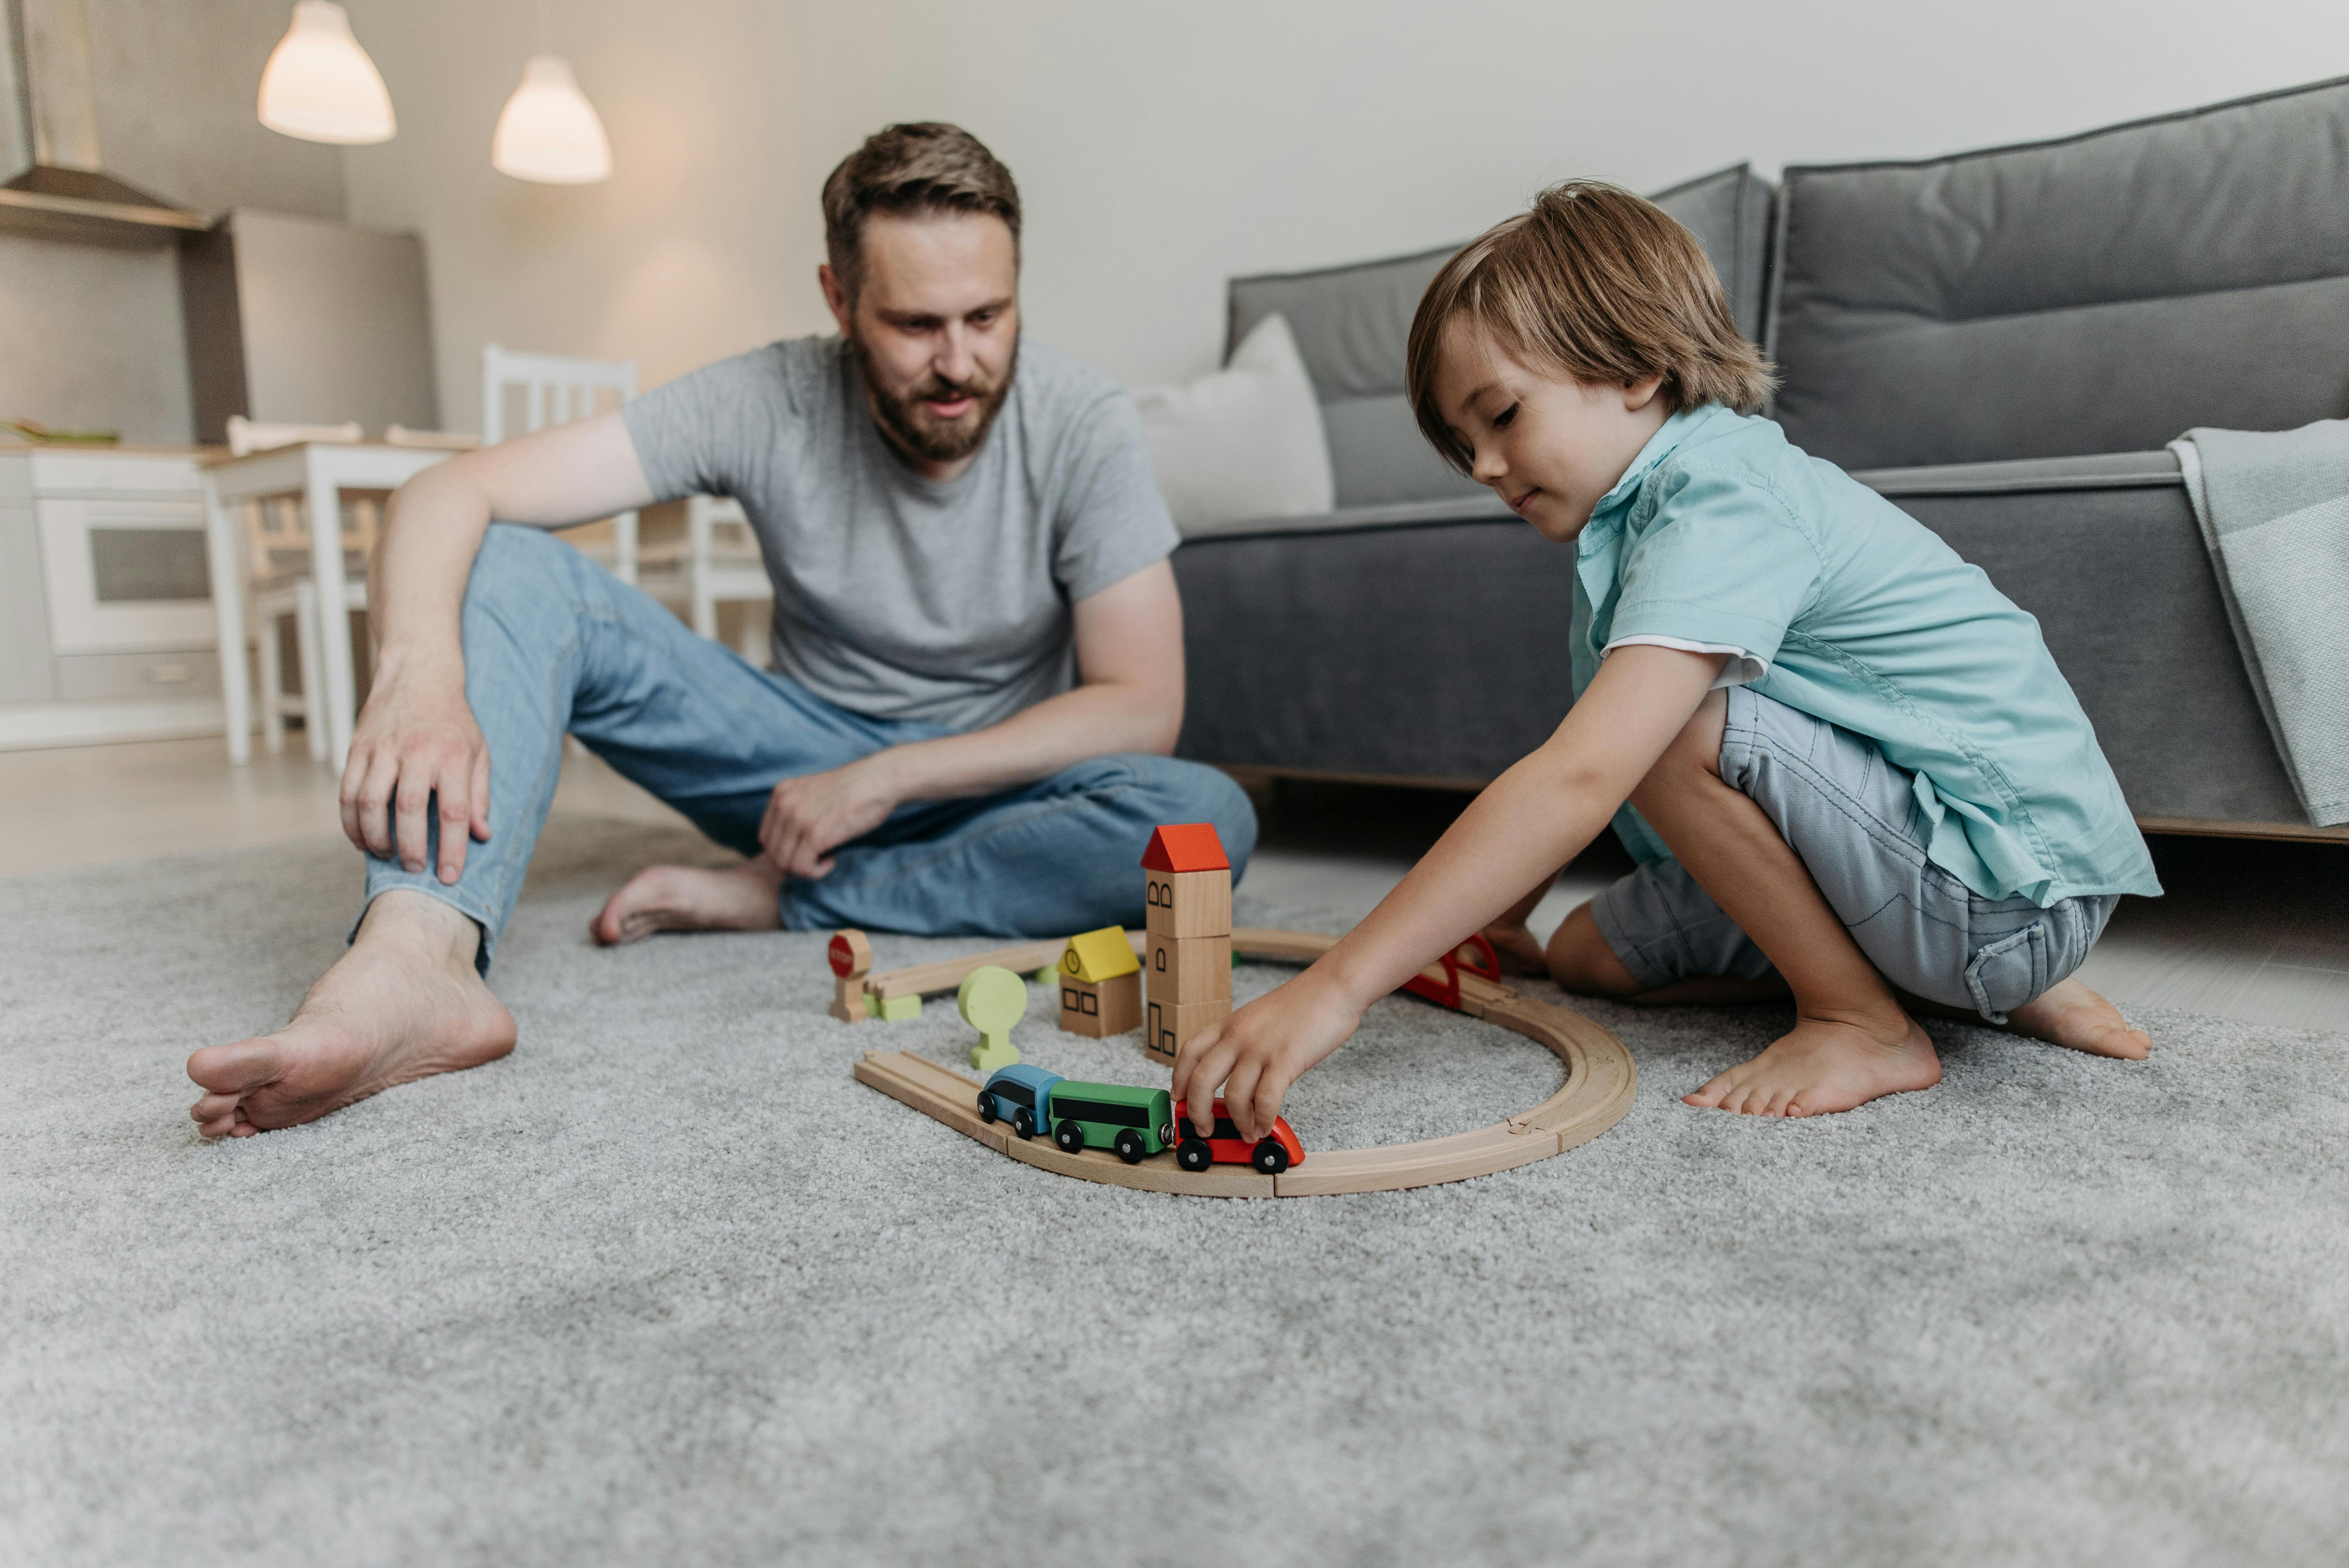 A father playing with his son on the living room floor | Source: Pexels